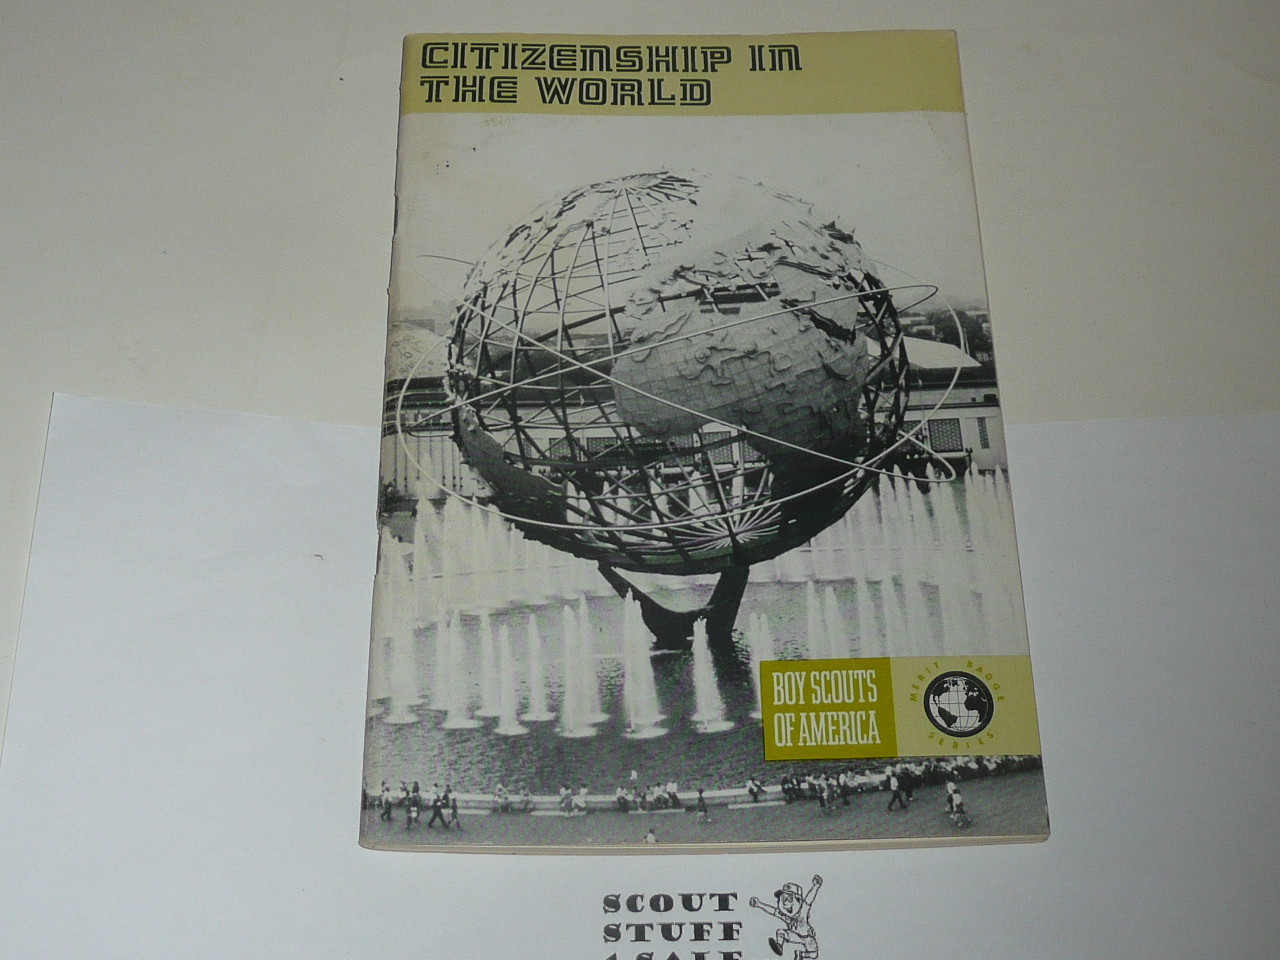 Citizenship in the World Merit Badge Pamphlet, Type 8, Green Band Cover, 9-74 Printing